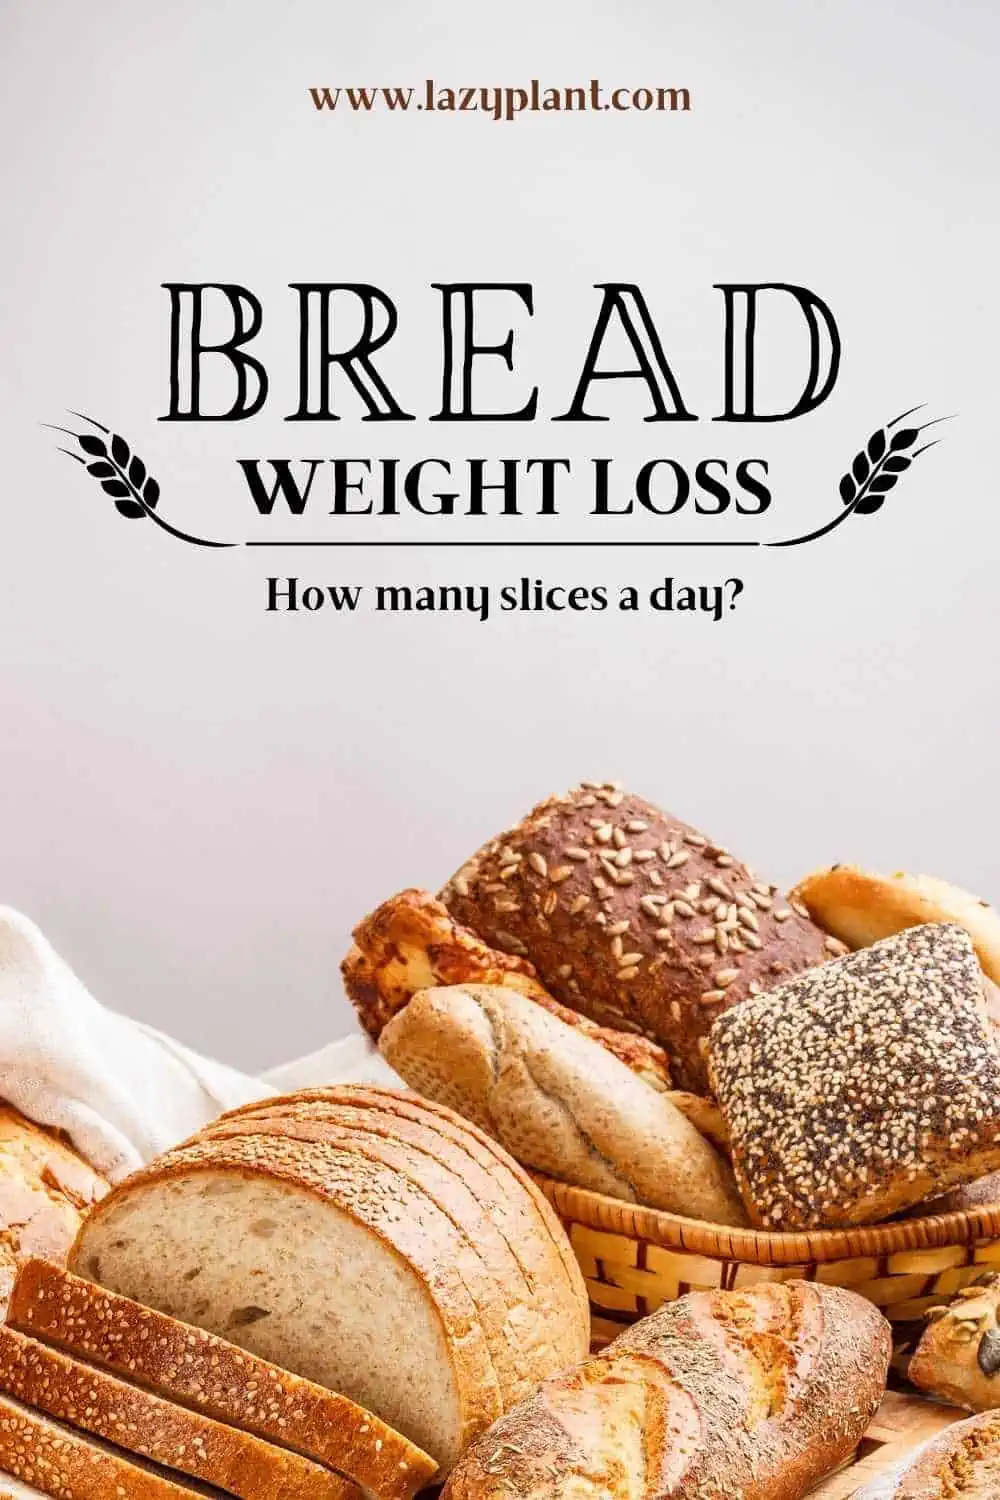 1-2 slices of bread a day support weight loss!